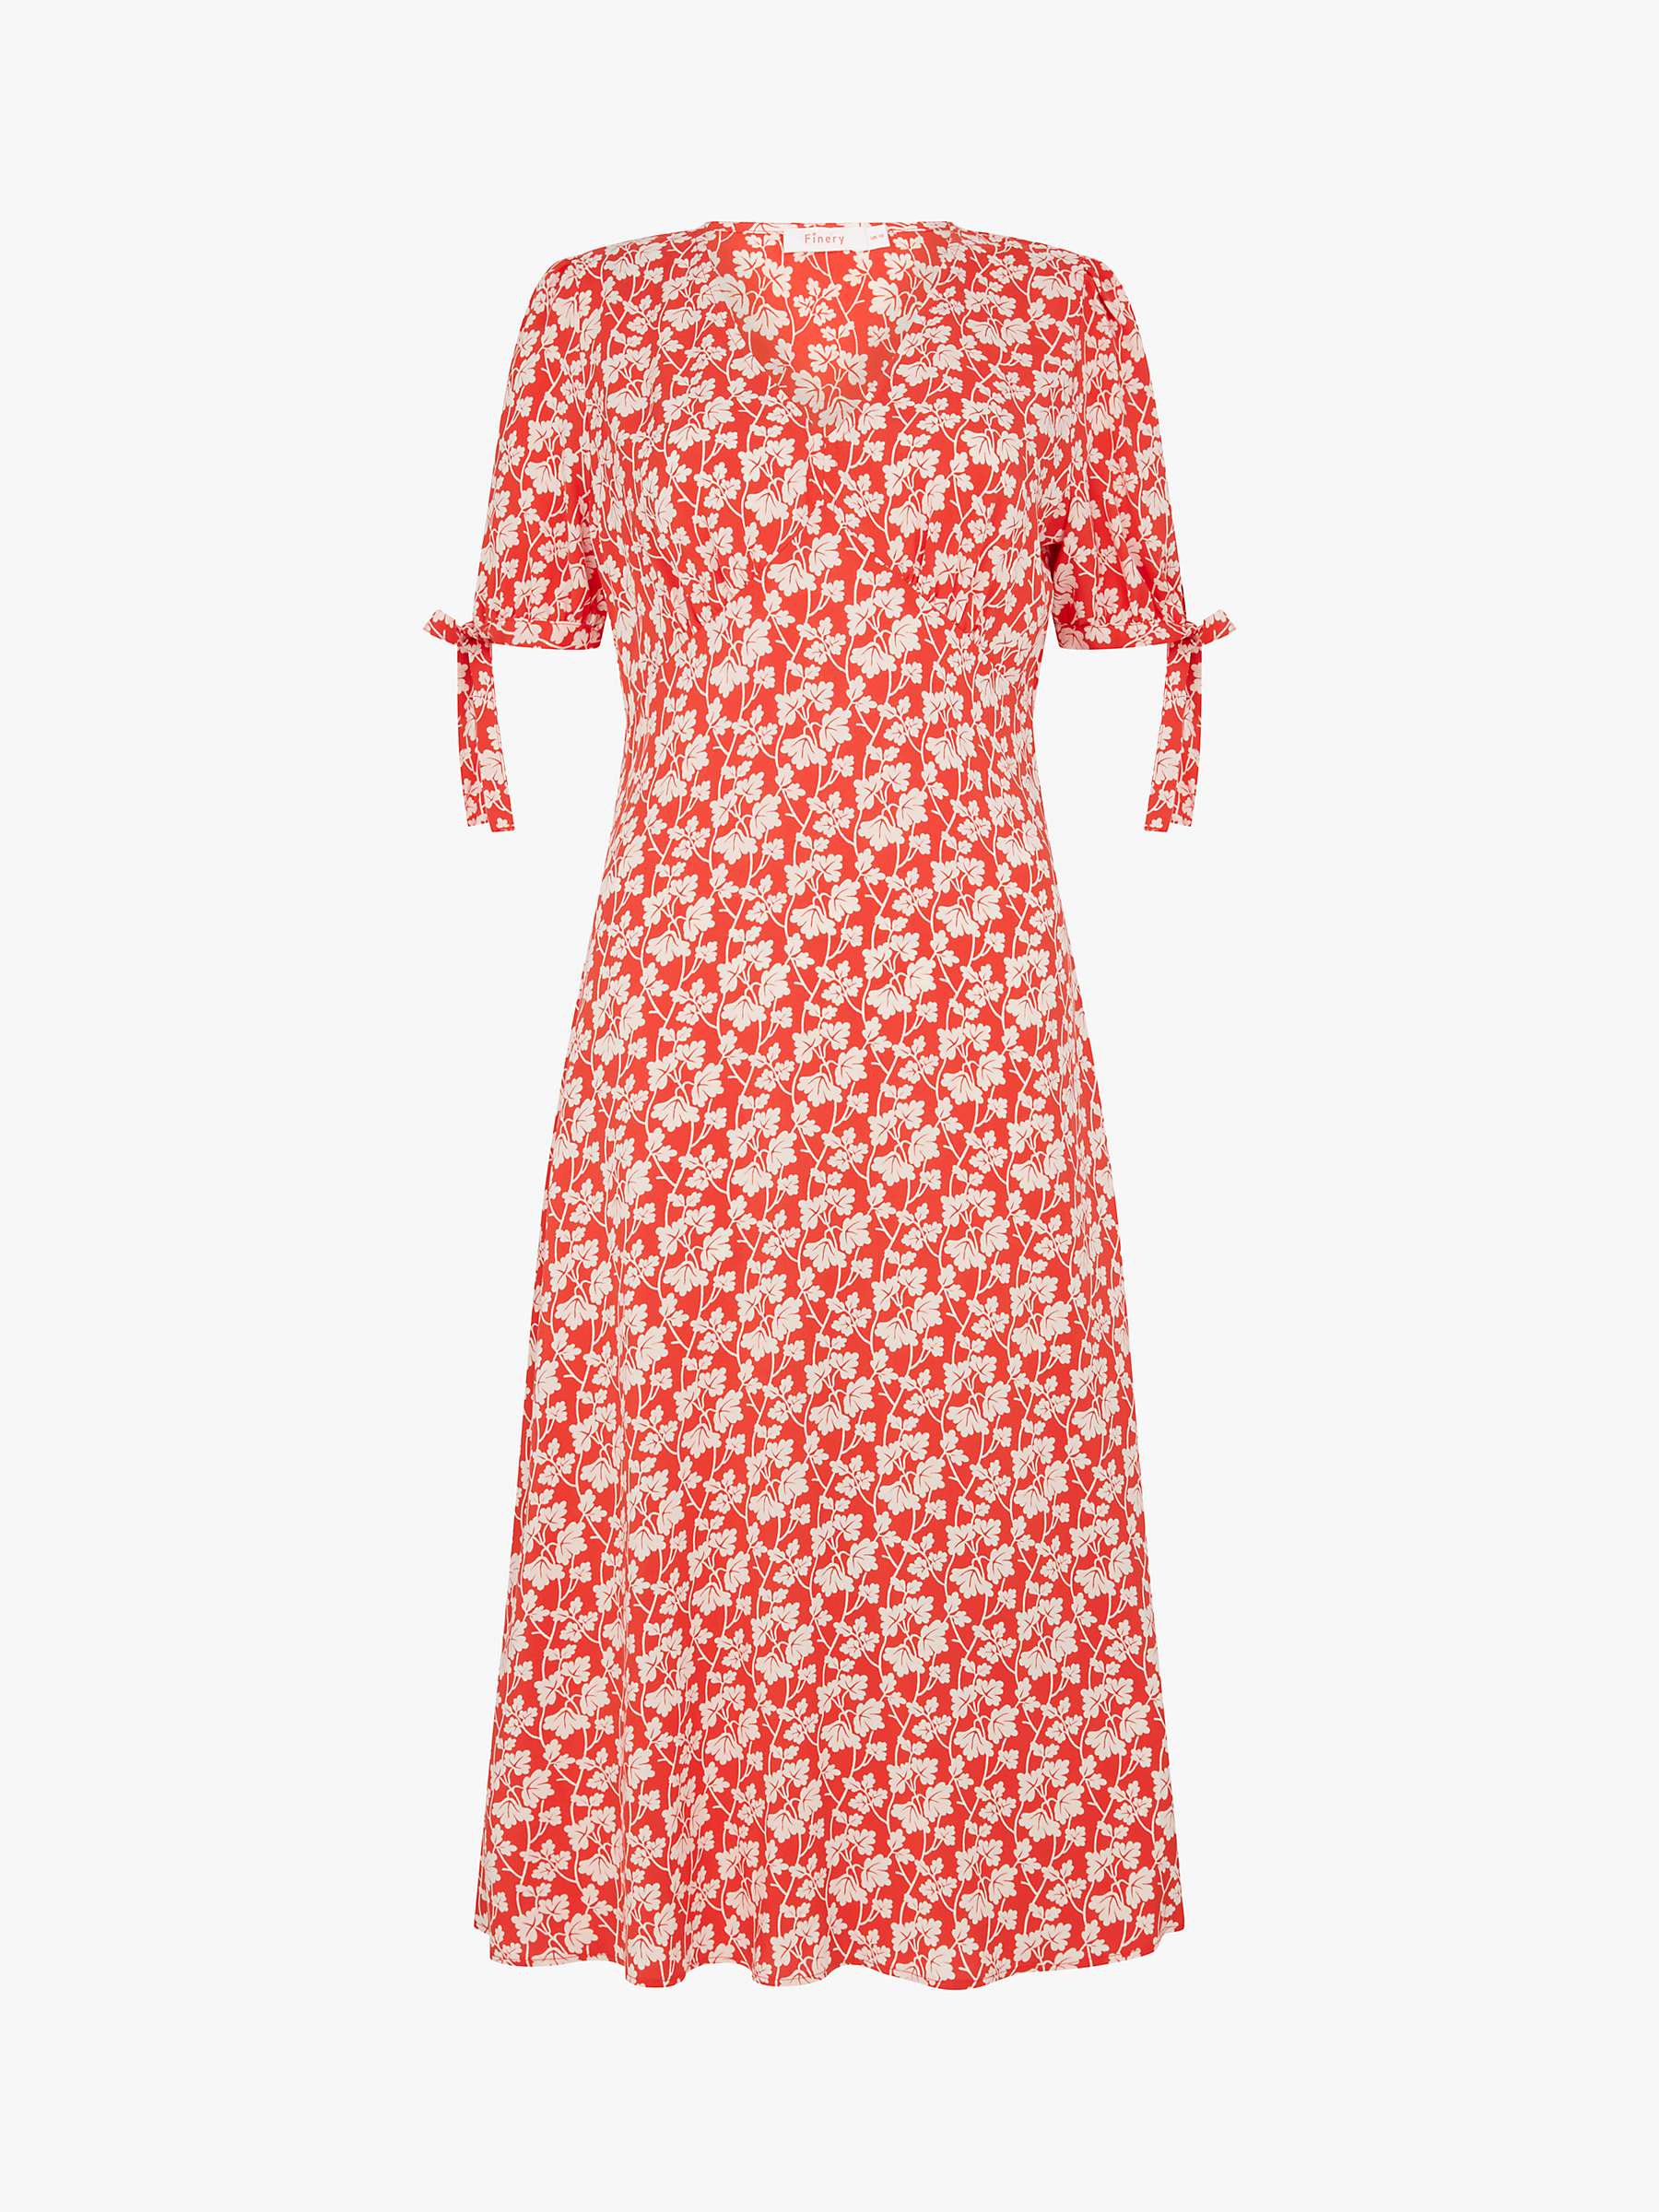 Buy Finery Claire Leaves Print Midi Dress, Red/Multi Online at johnlewis.com